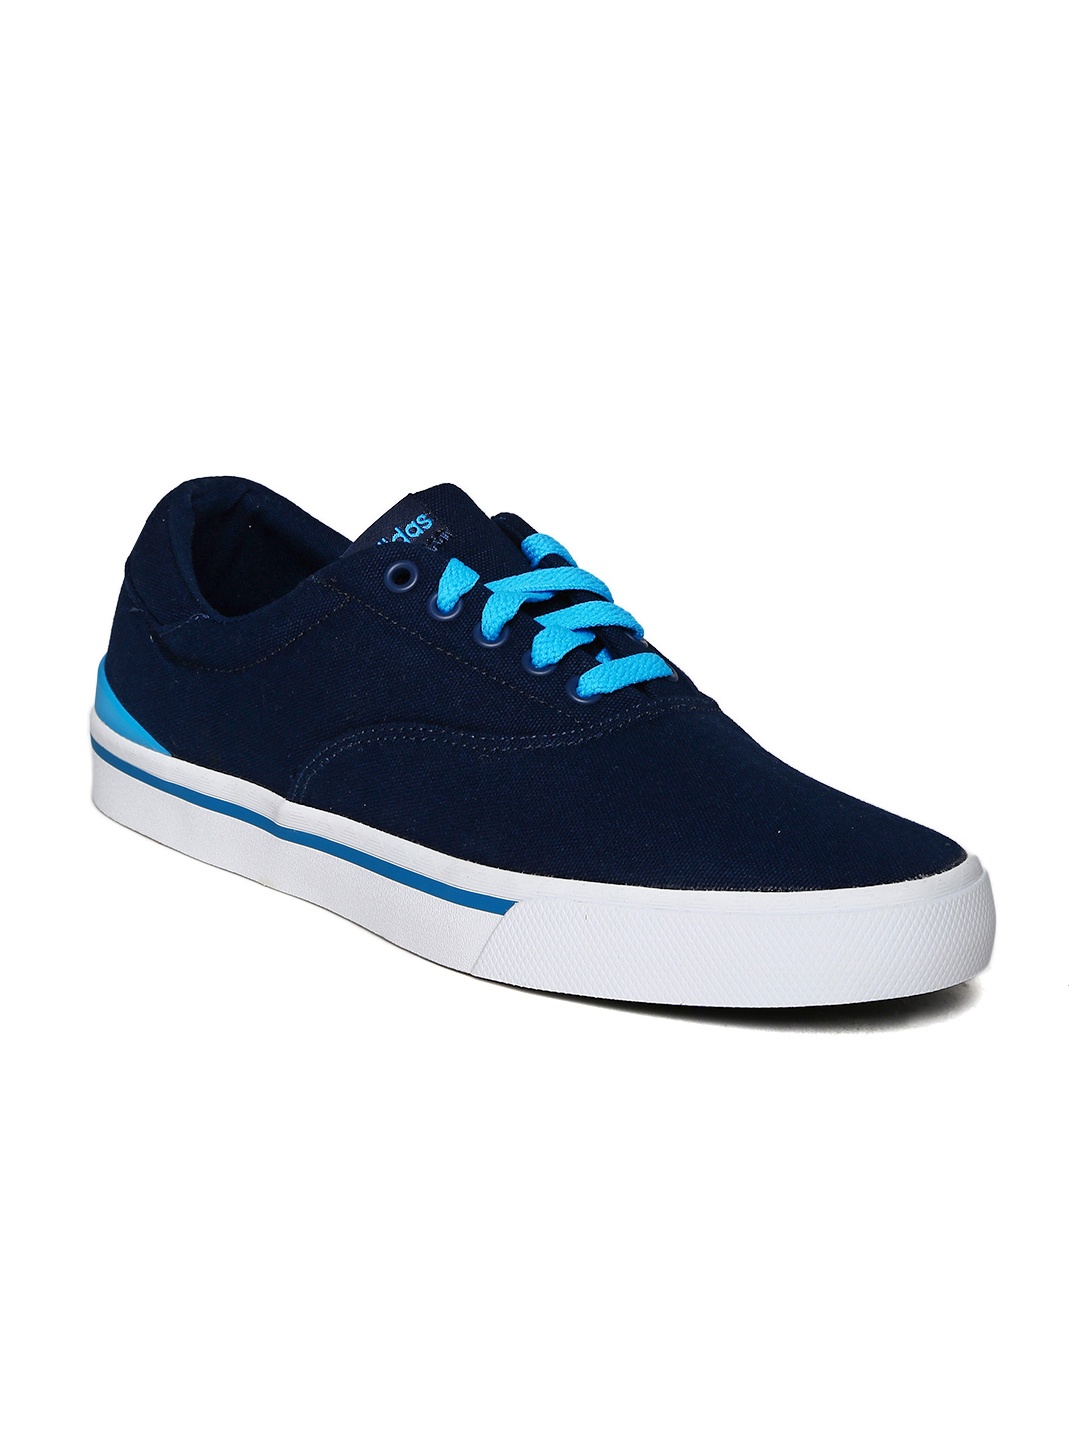 Adidas NEO Men Navy Park ST Classic Casual Shoes at Myntra